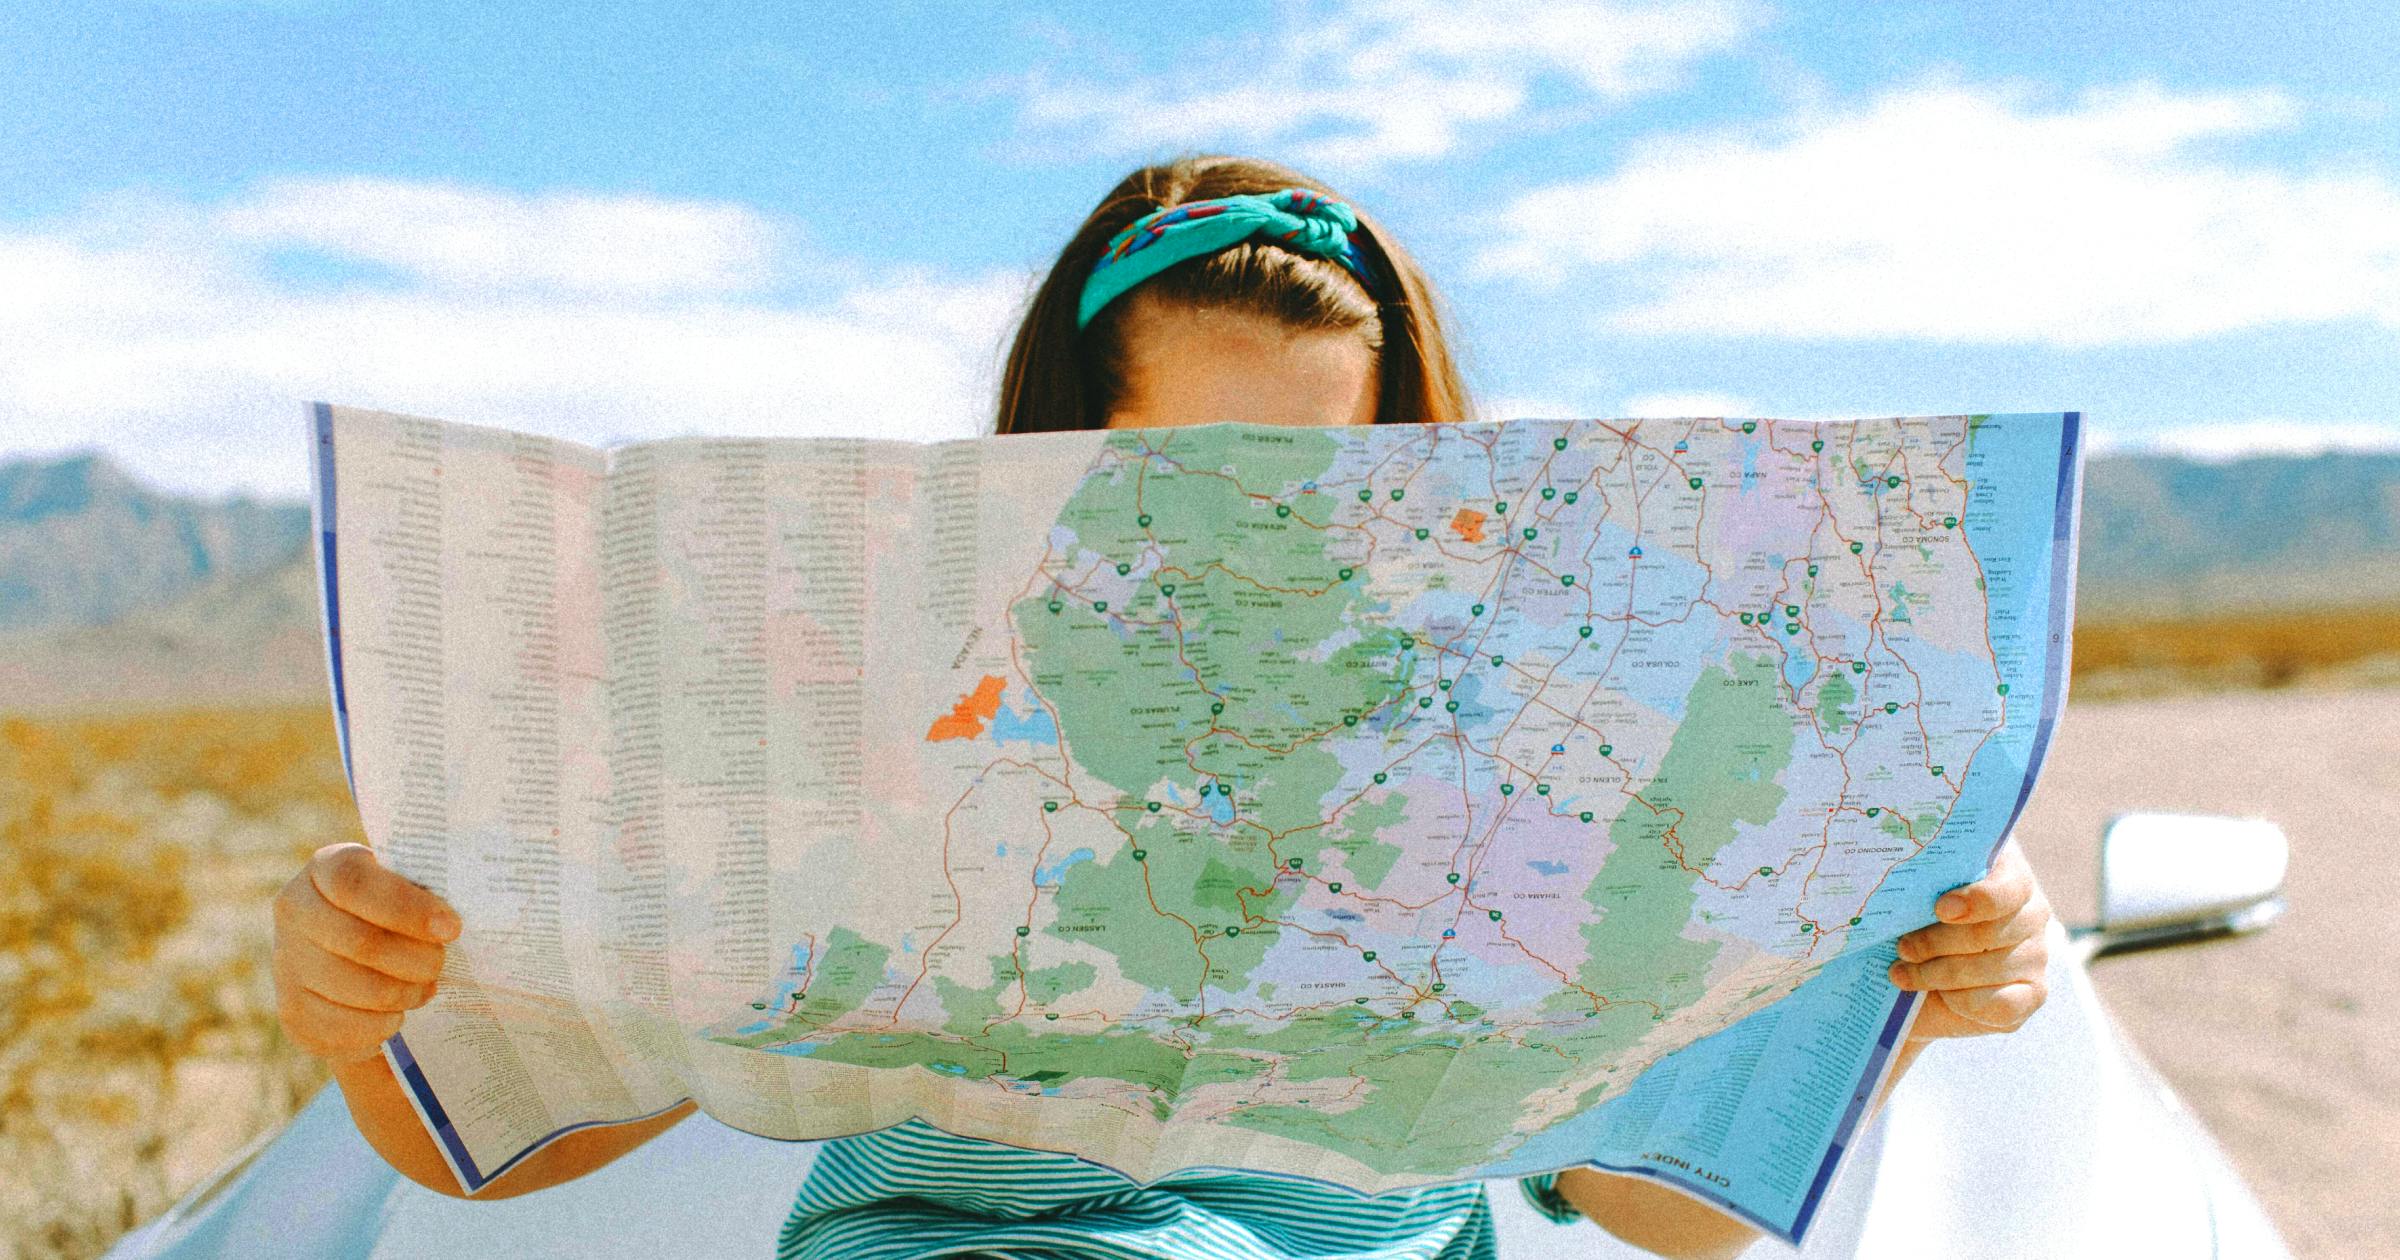 Girl with a blue shirt and headband looking at a map with a car and landscape behind her